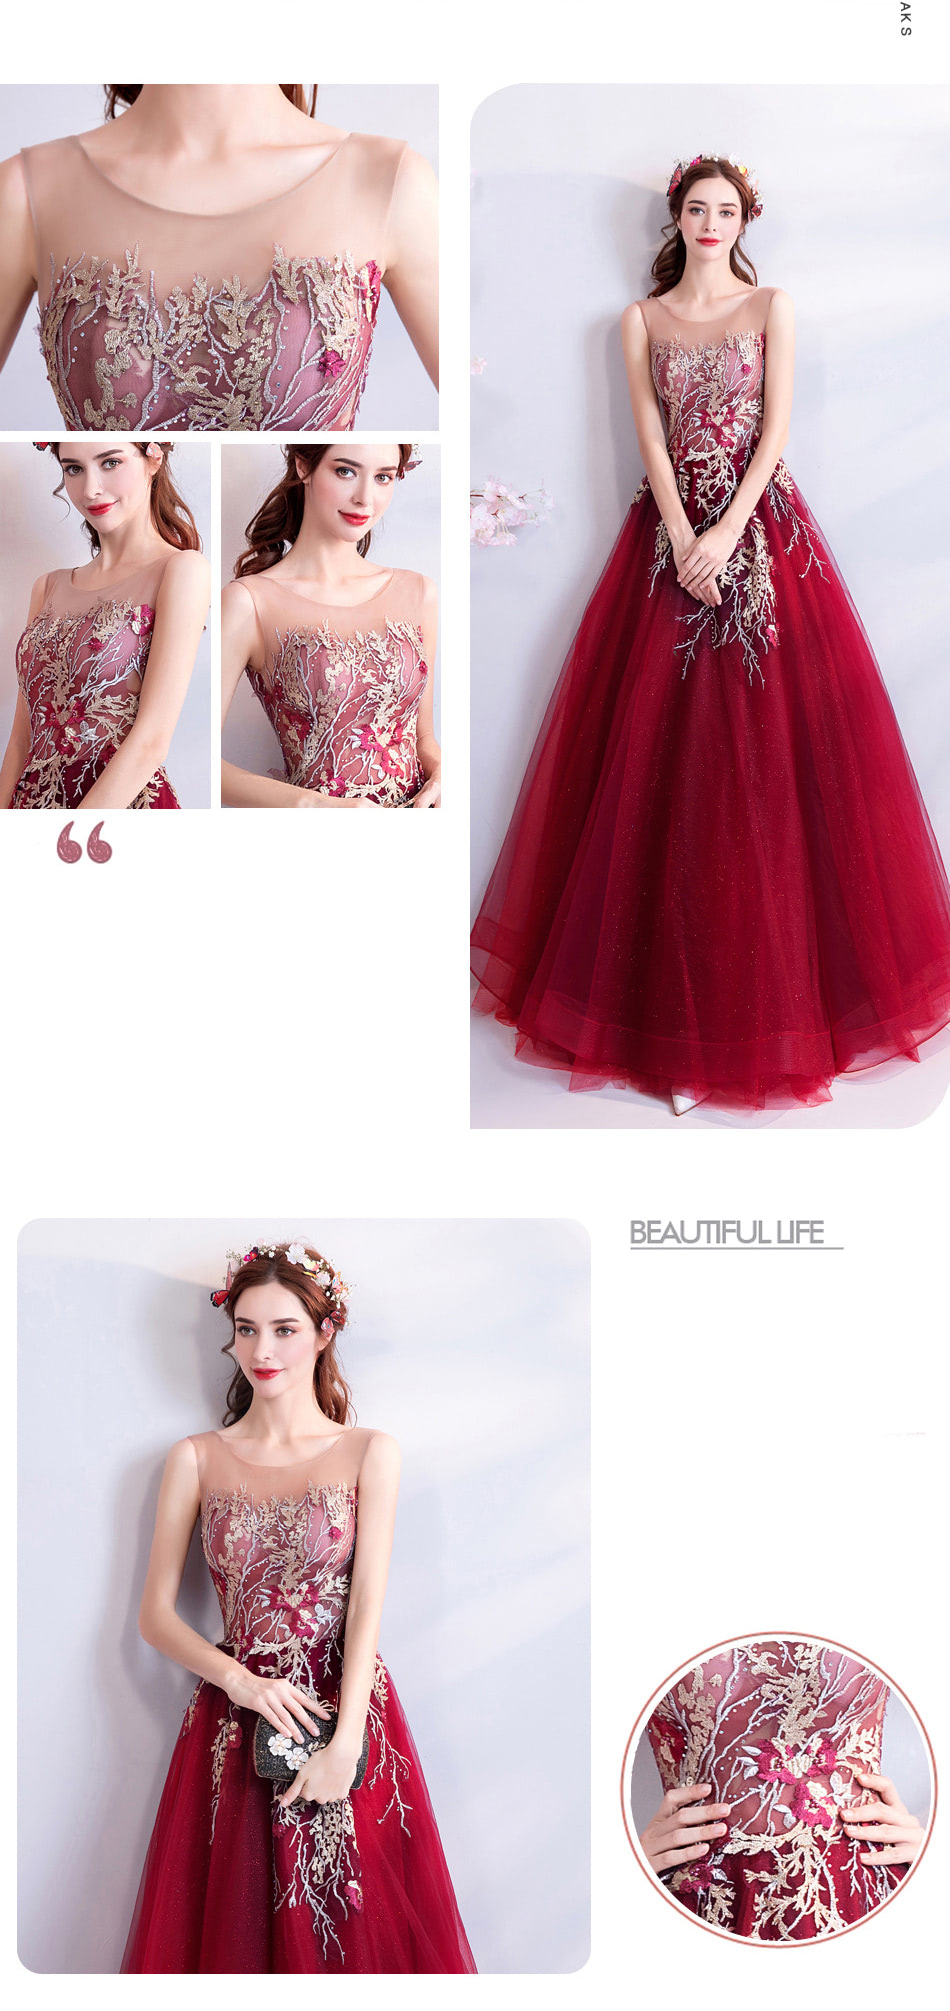 Gorgeous-Red-Couture-Dress-for-Wedding-Party-Prom-All-Occasions08.jpg